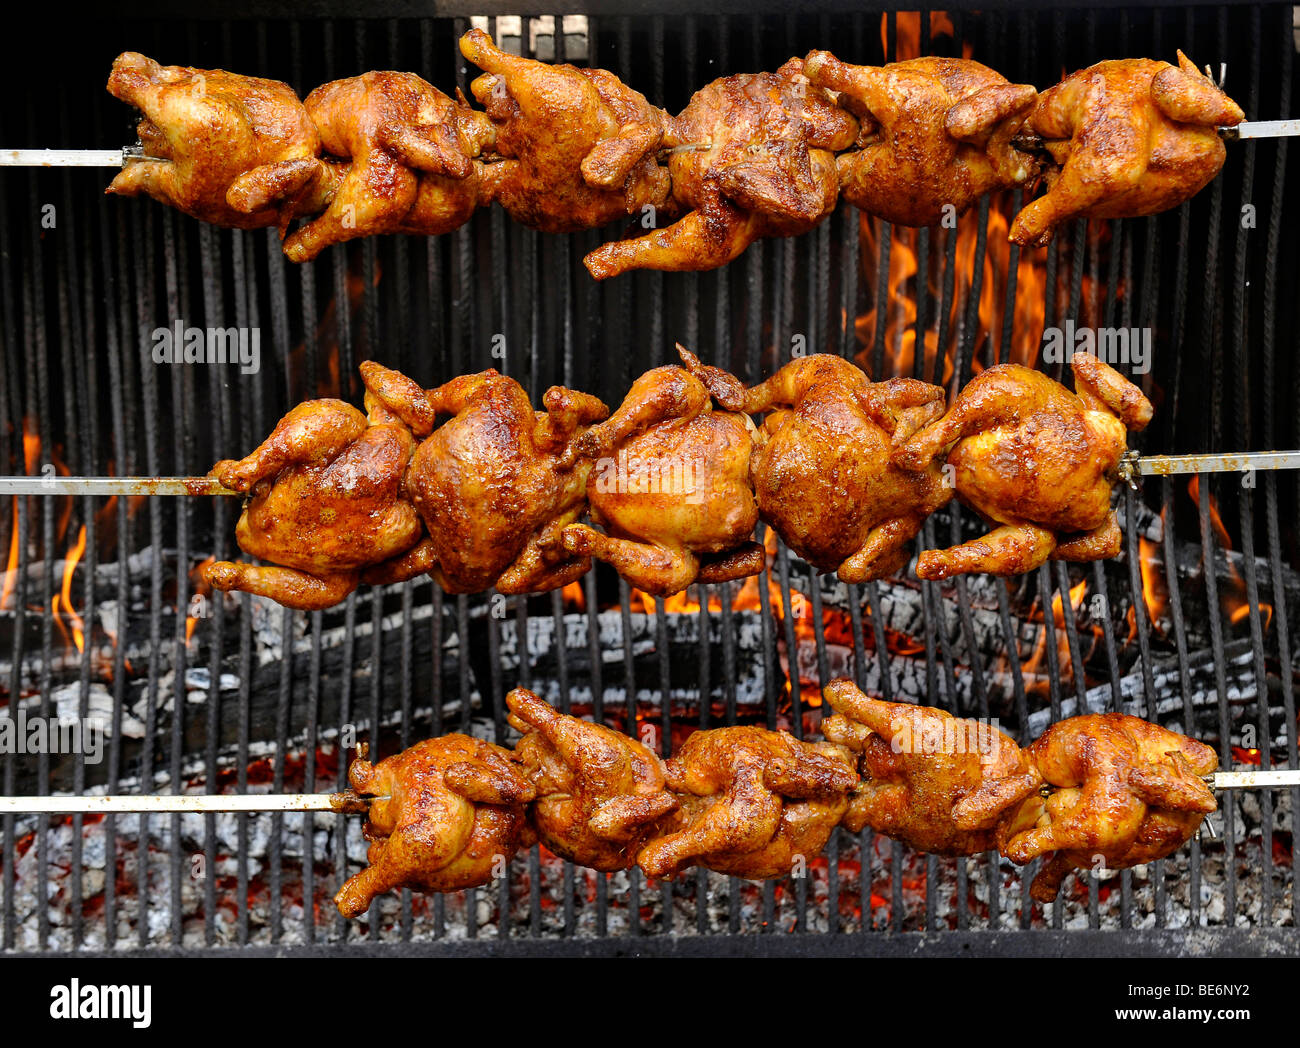 Fleisch Grillen High Resolution Stock Photography and Images - Alamy